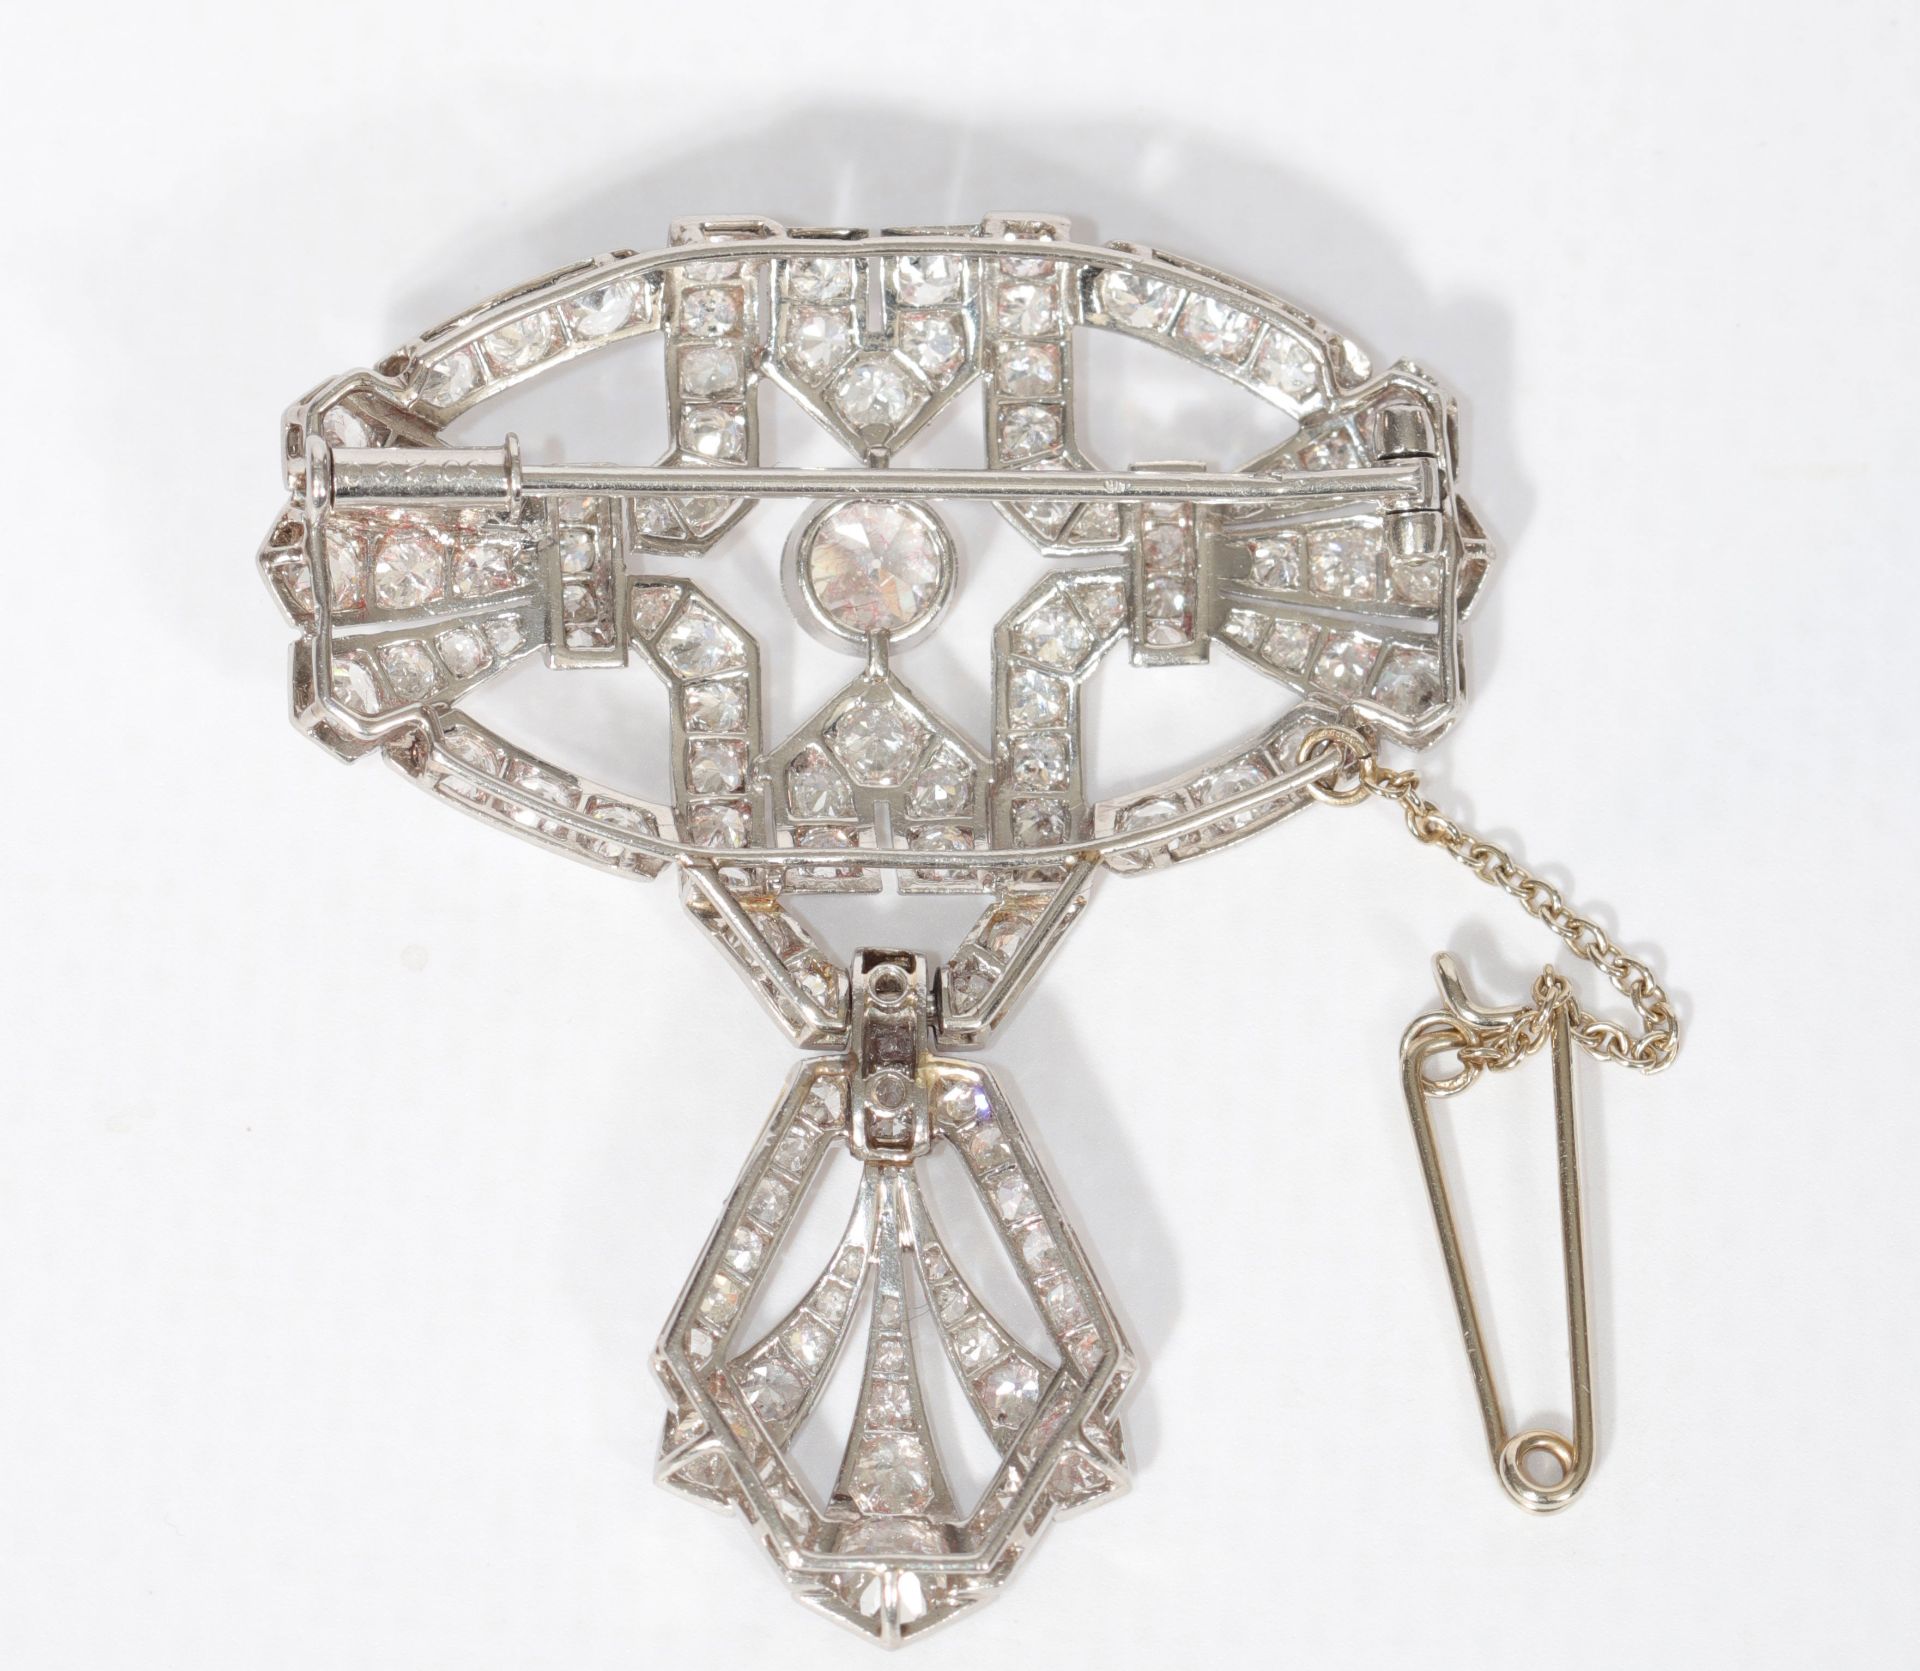 Geometric Art Deco brooch in platinum and paved with diamonds - Image 2 of 3